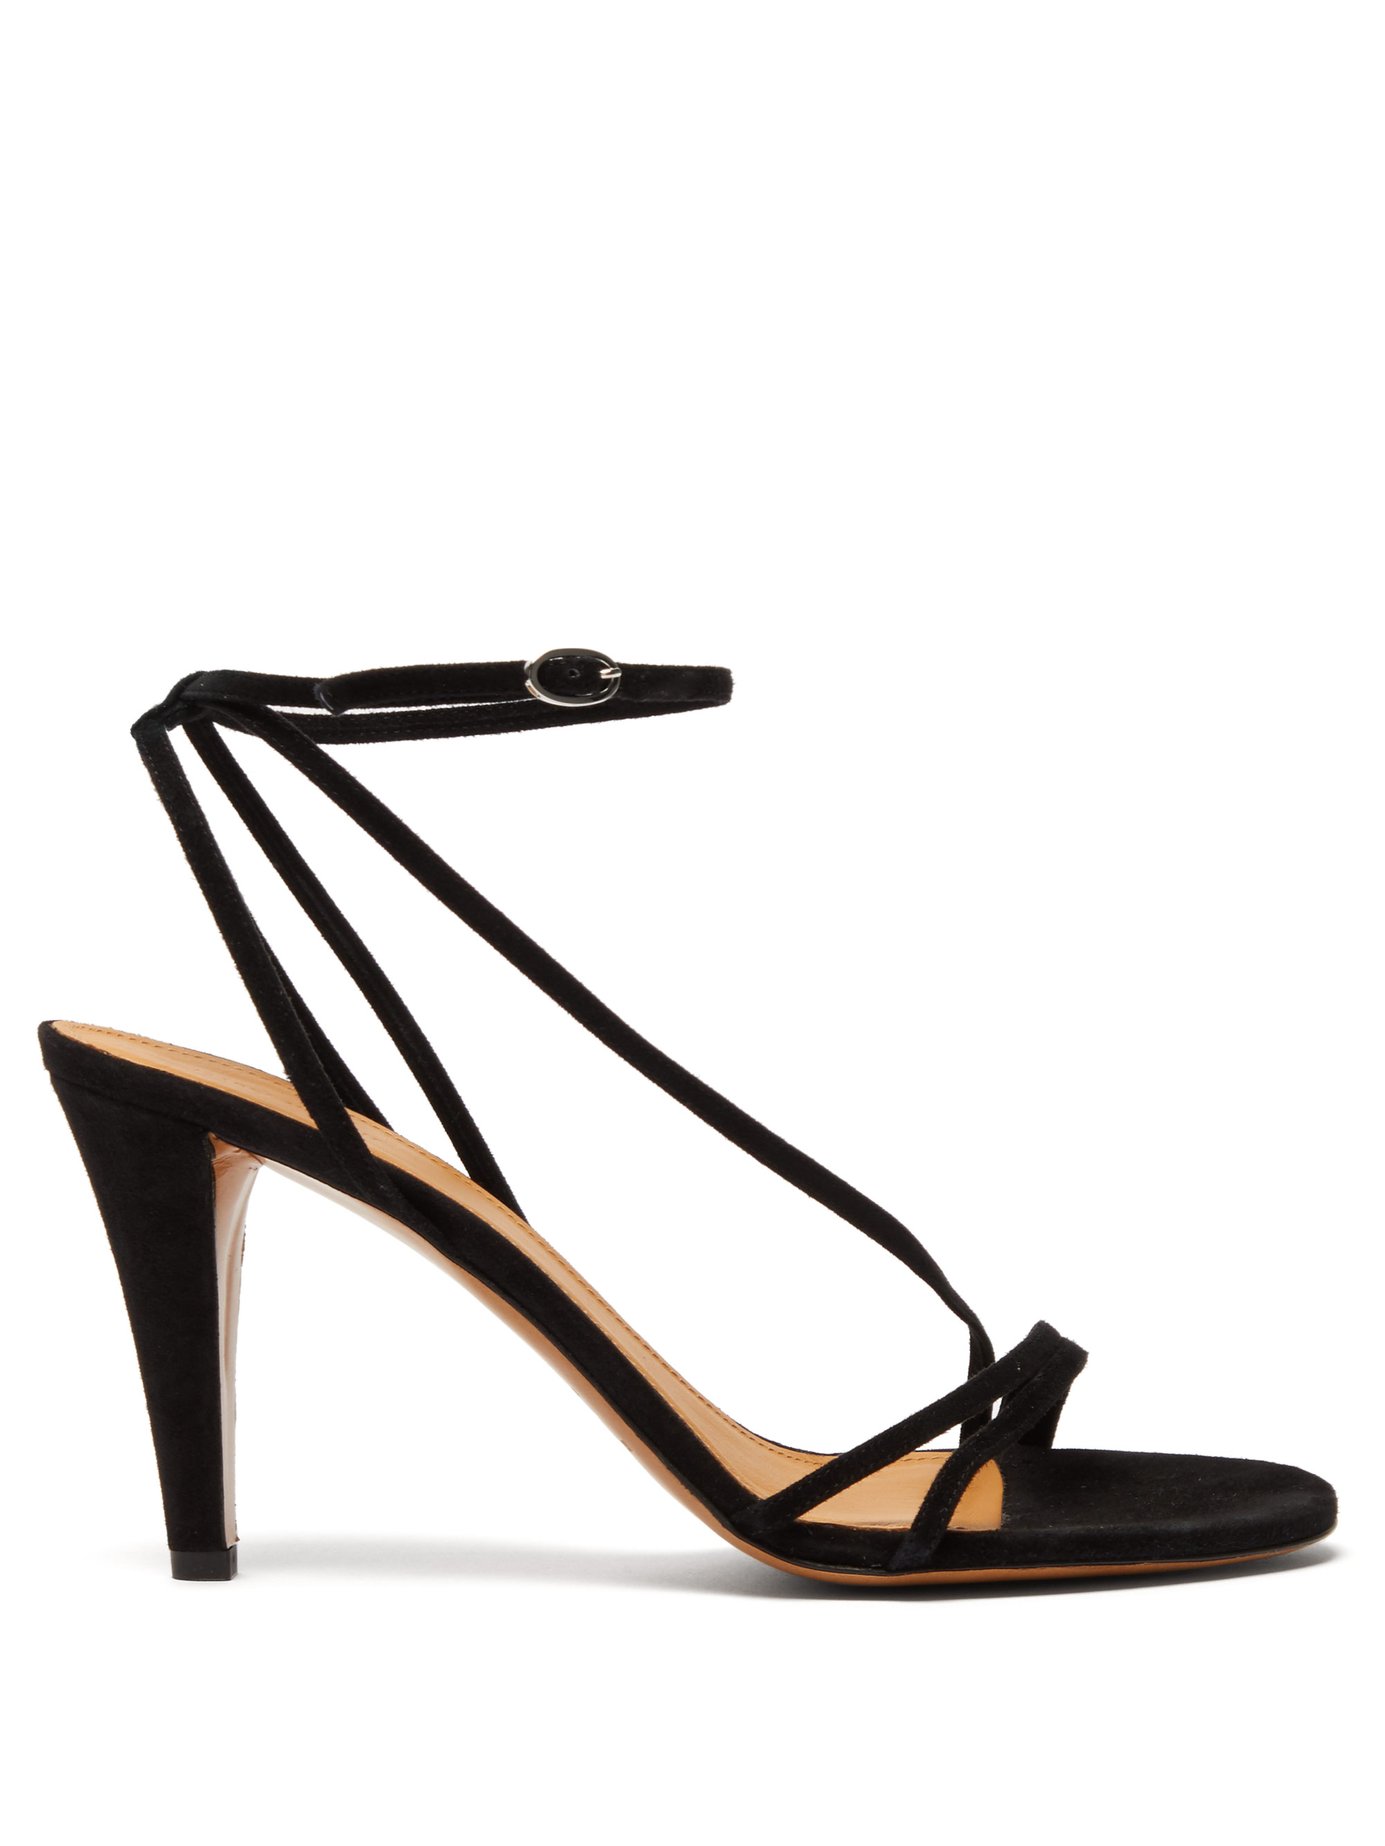 Isabel Marant - Arora Suede Sandals - Black | ABOUT ICONS